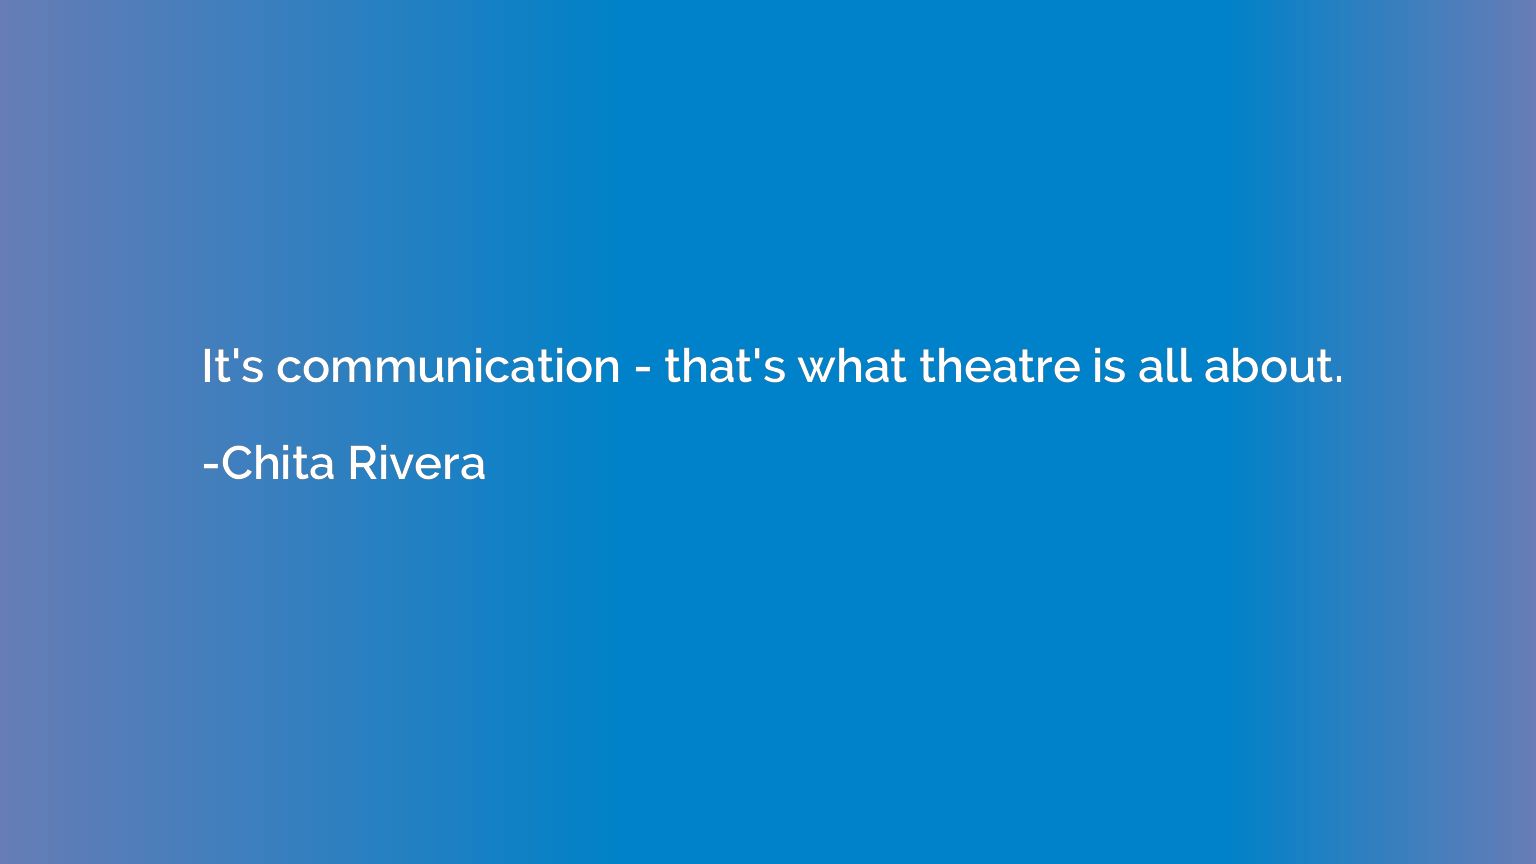 It's communication - that's what theatre is all about.